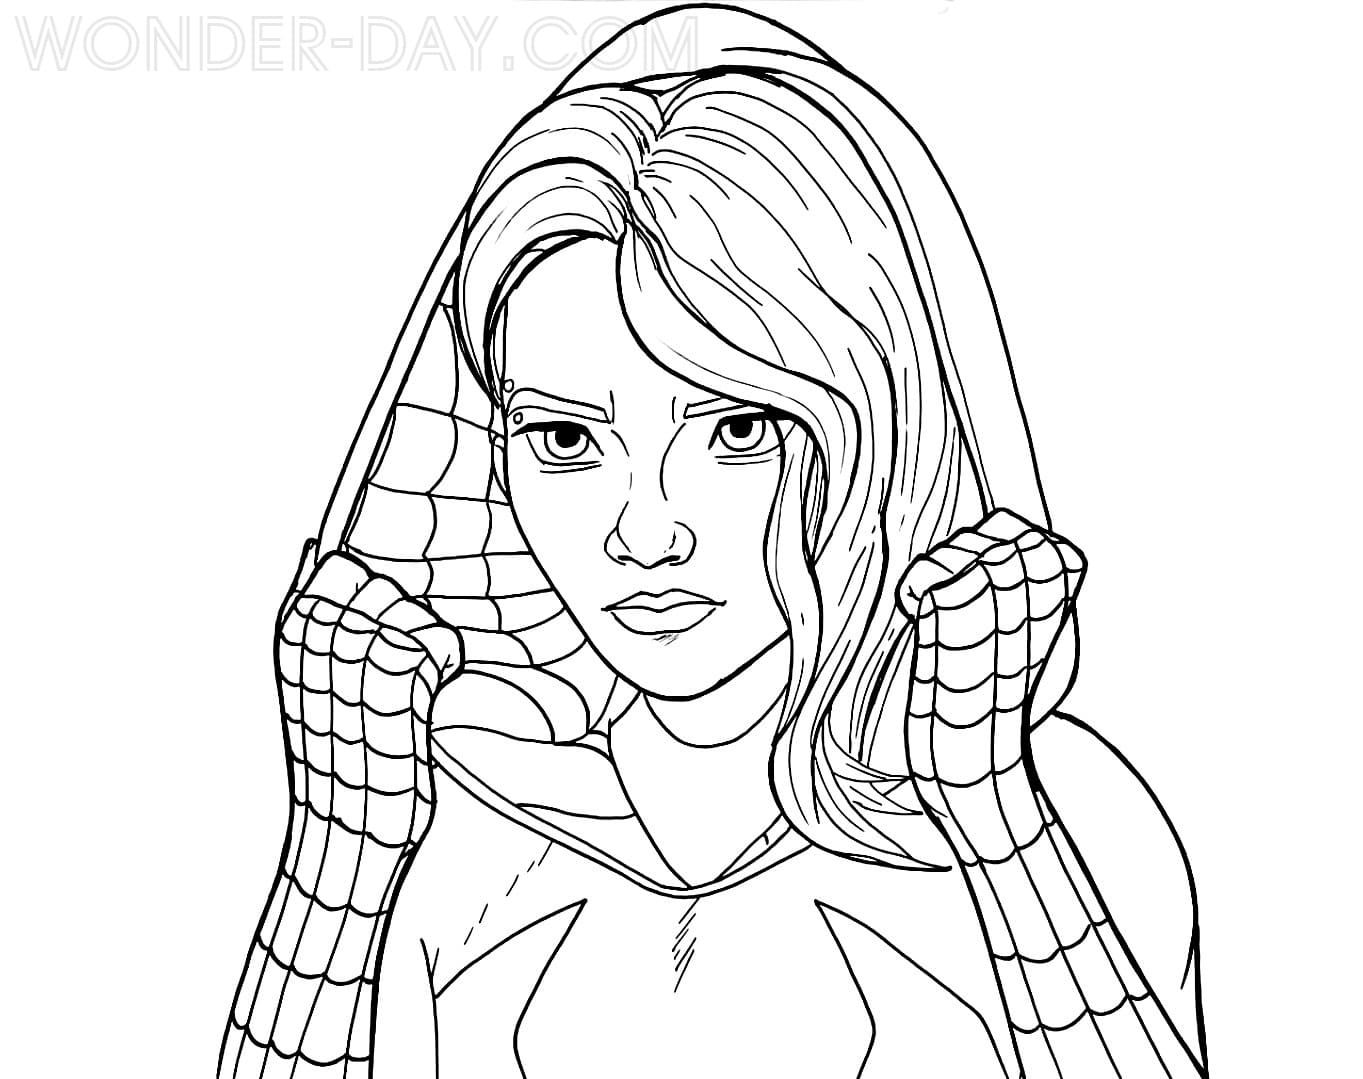 Spider-Man: Across the Spider Coloring Pages | WONDER DAY — Coloring pages  for children and adults